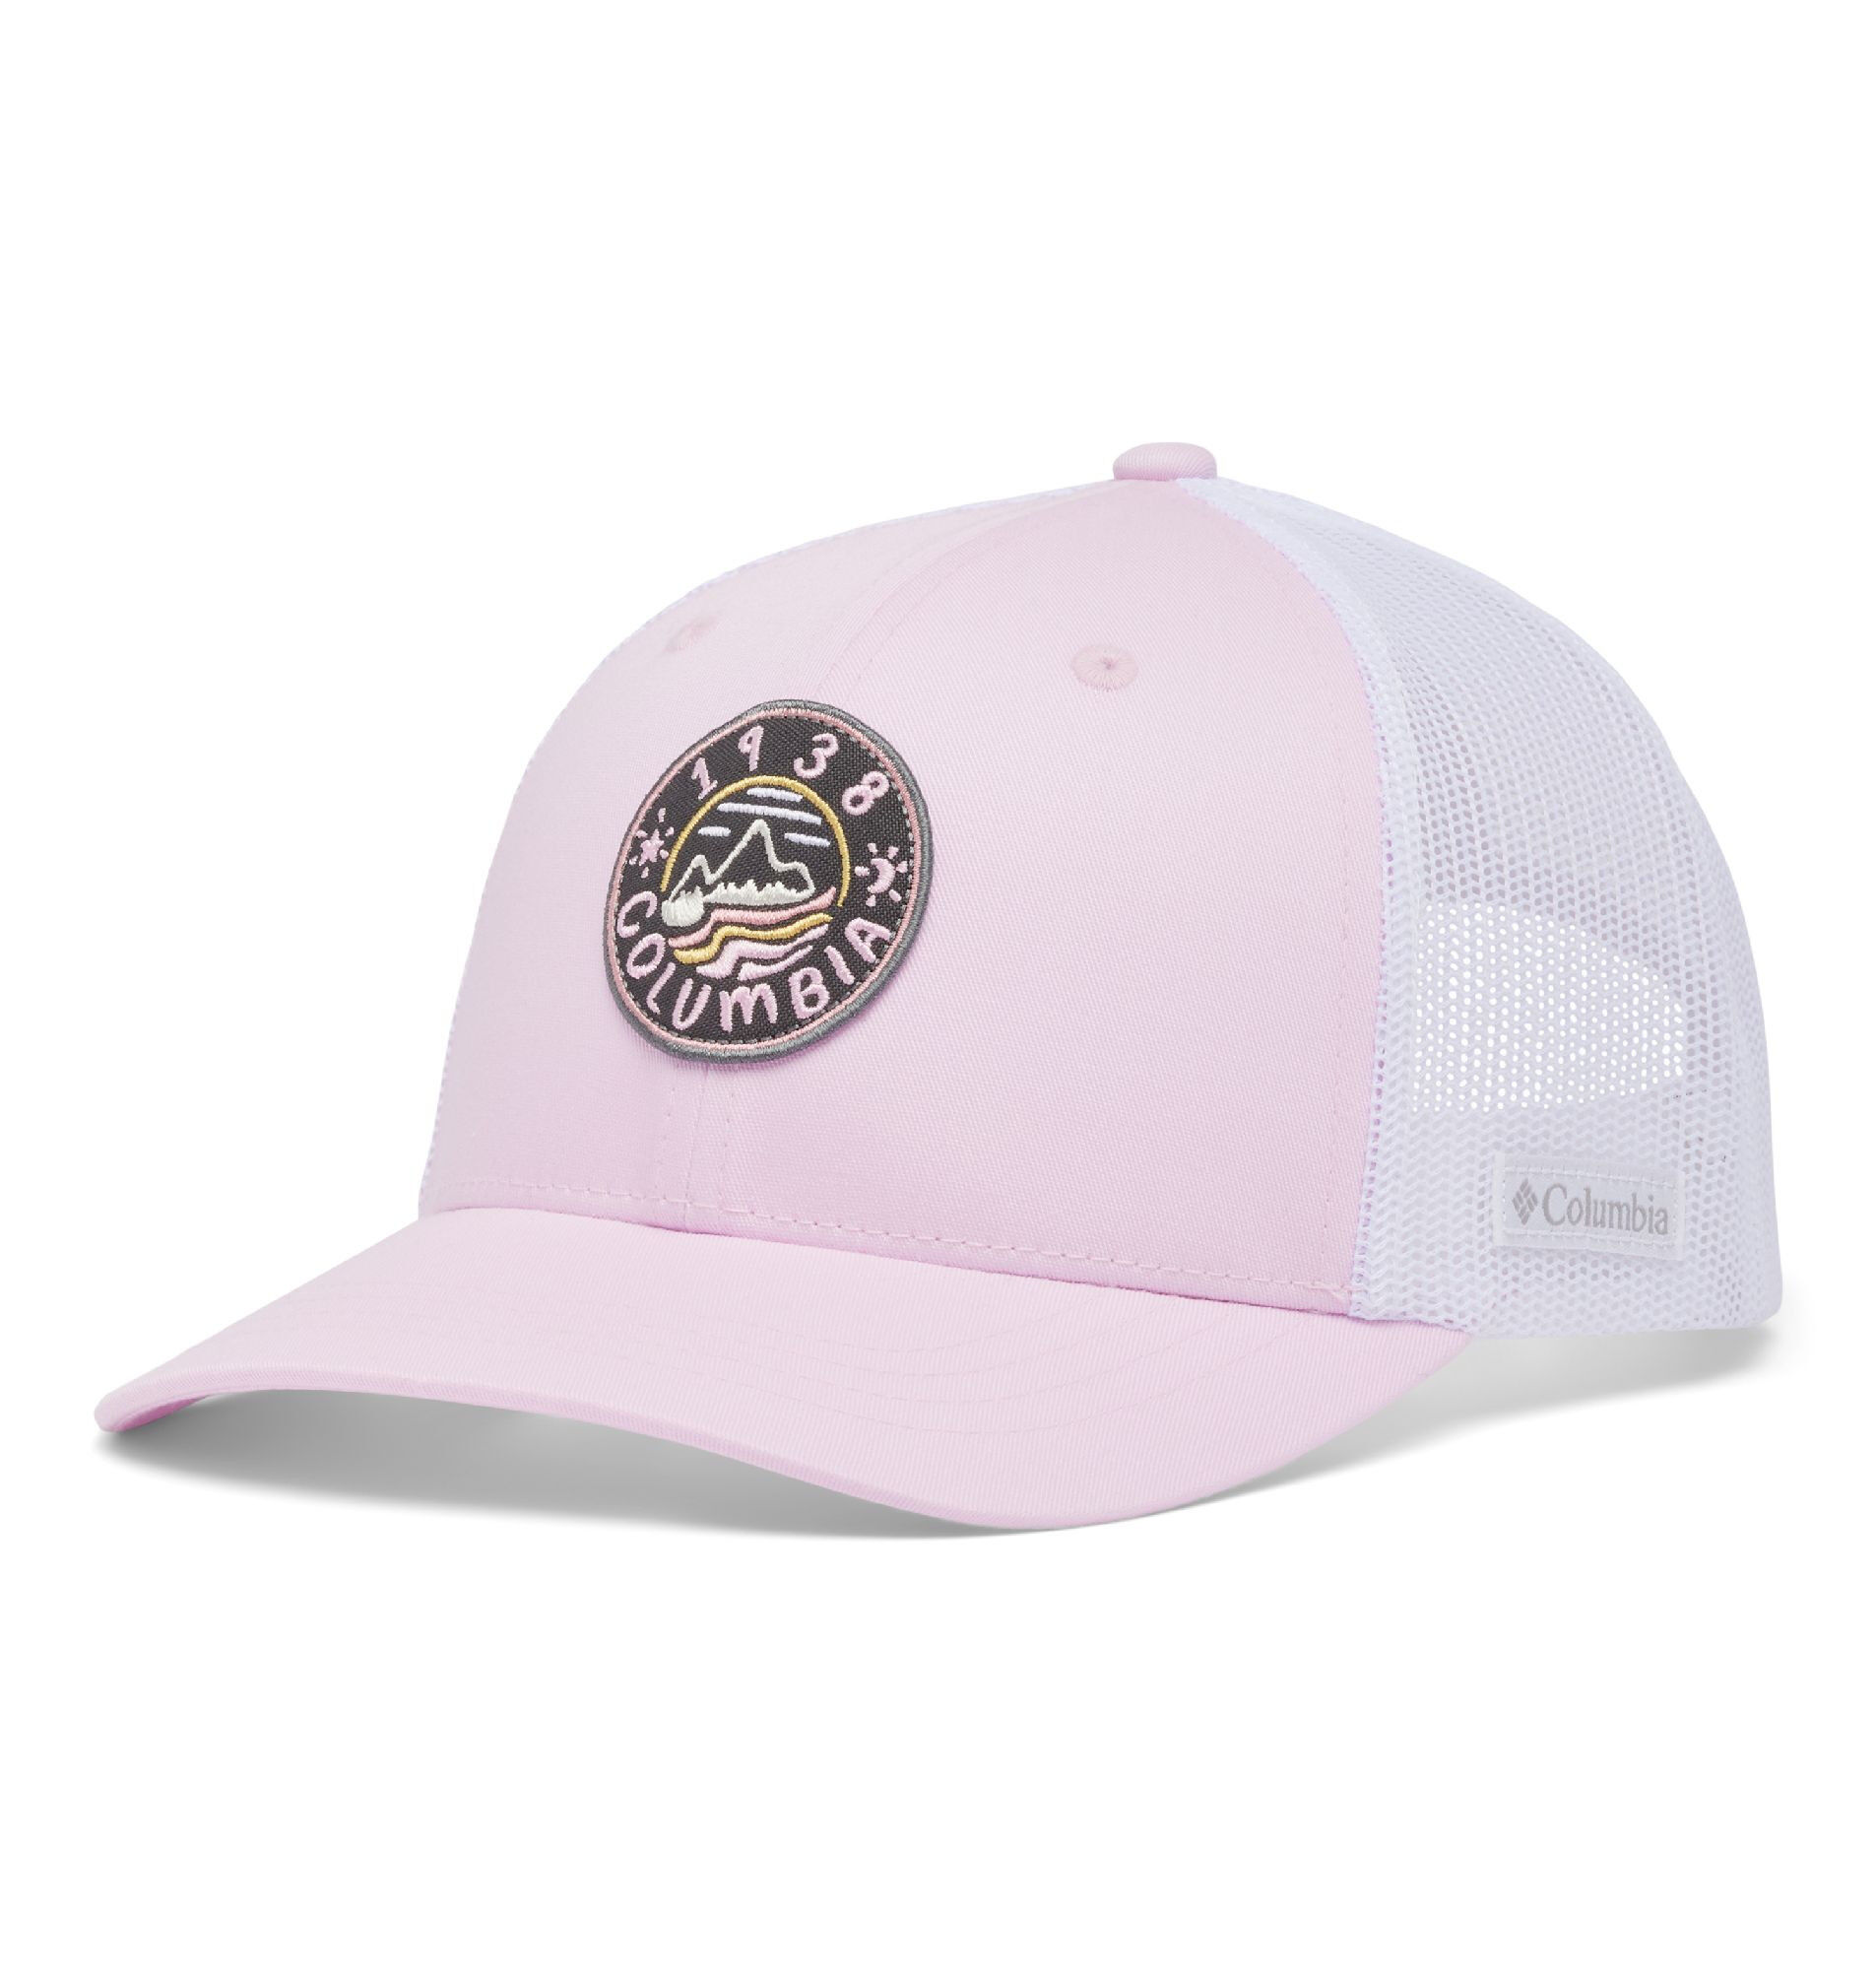 Columbia Youth Snap Back - Casquette enfant | Hardloop